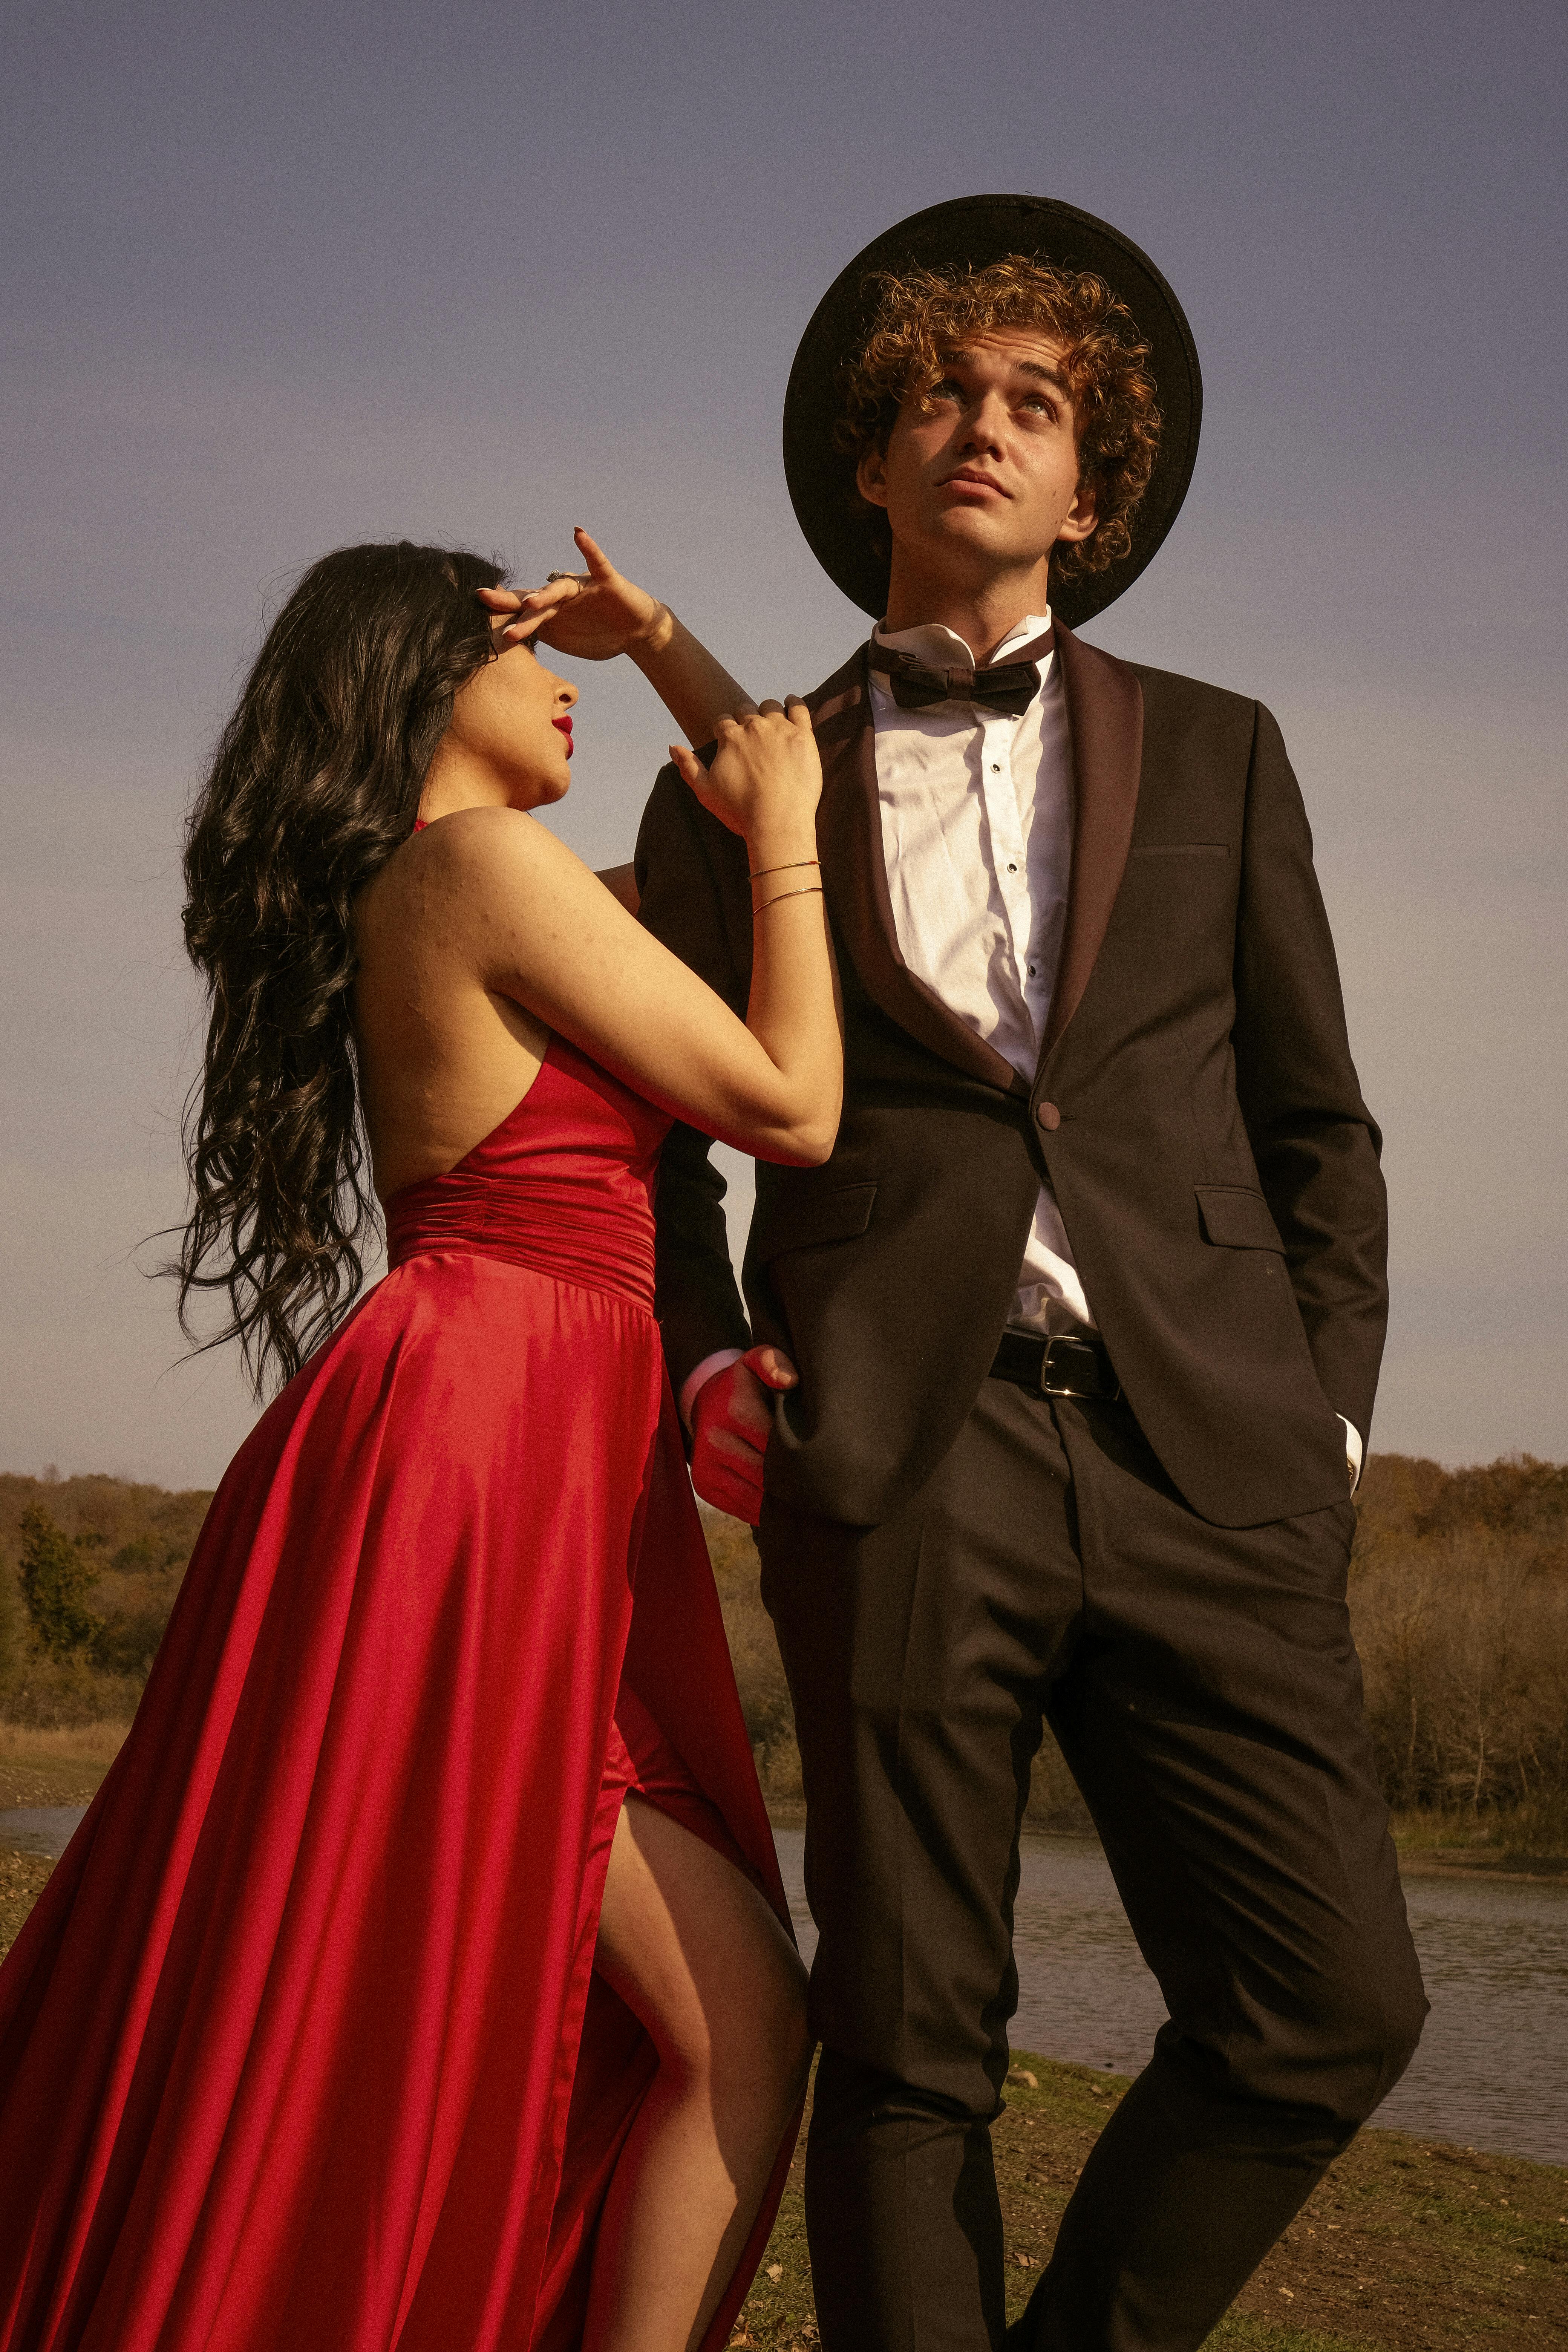 Free Photos - A Stylish Young Couple Posing Together In A Red Dress And A  Suit. Both Of Them Are Wearing Glasses, Which Adds To Their Chic  Appearance. They Seem To Be